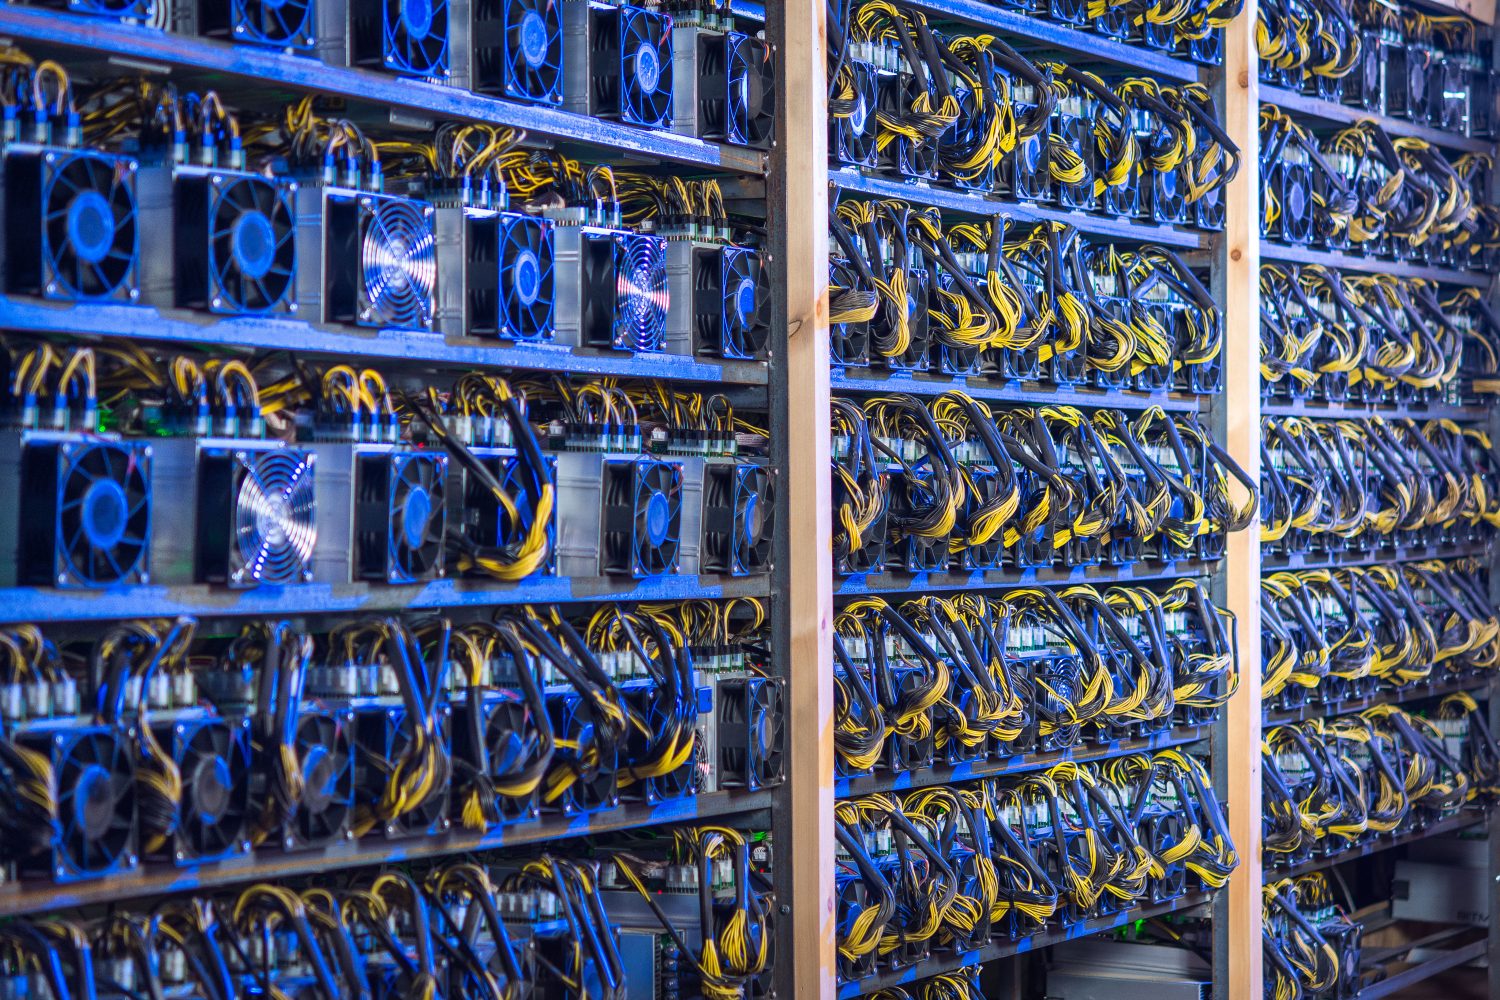 London-Listed Argo Blockchain Adds 1,000 Miners In Bid To Salvage Stock Price